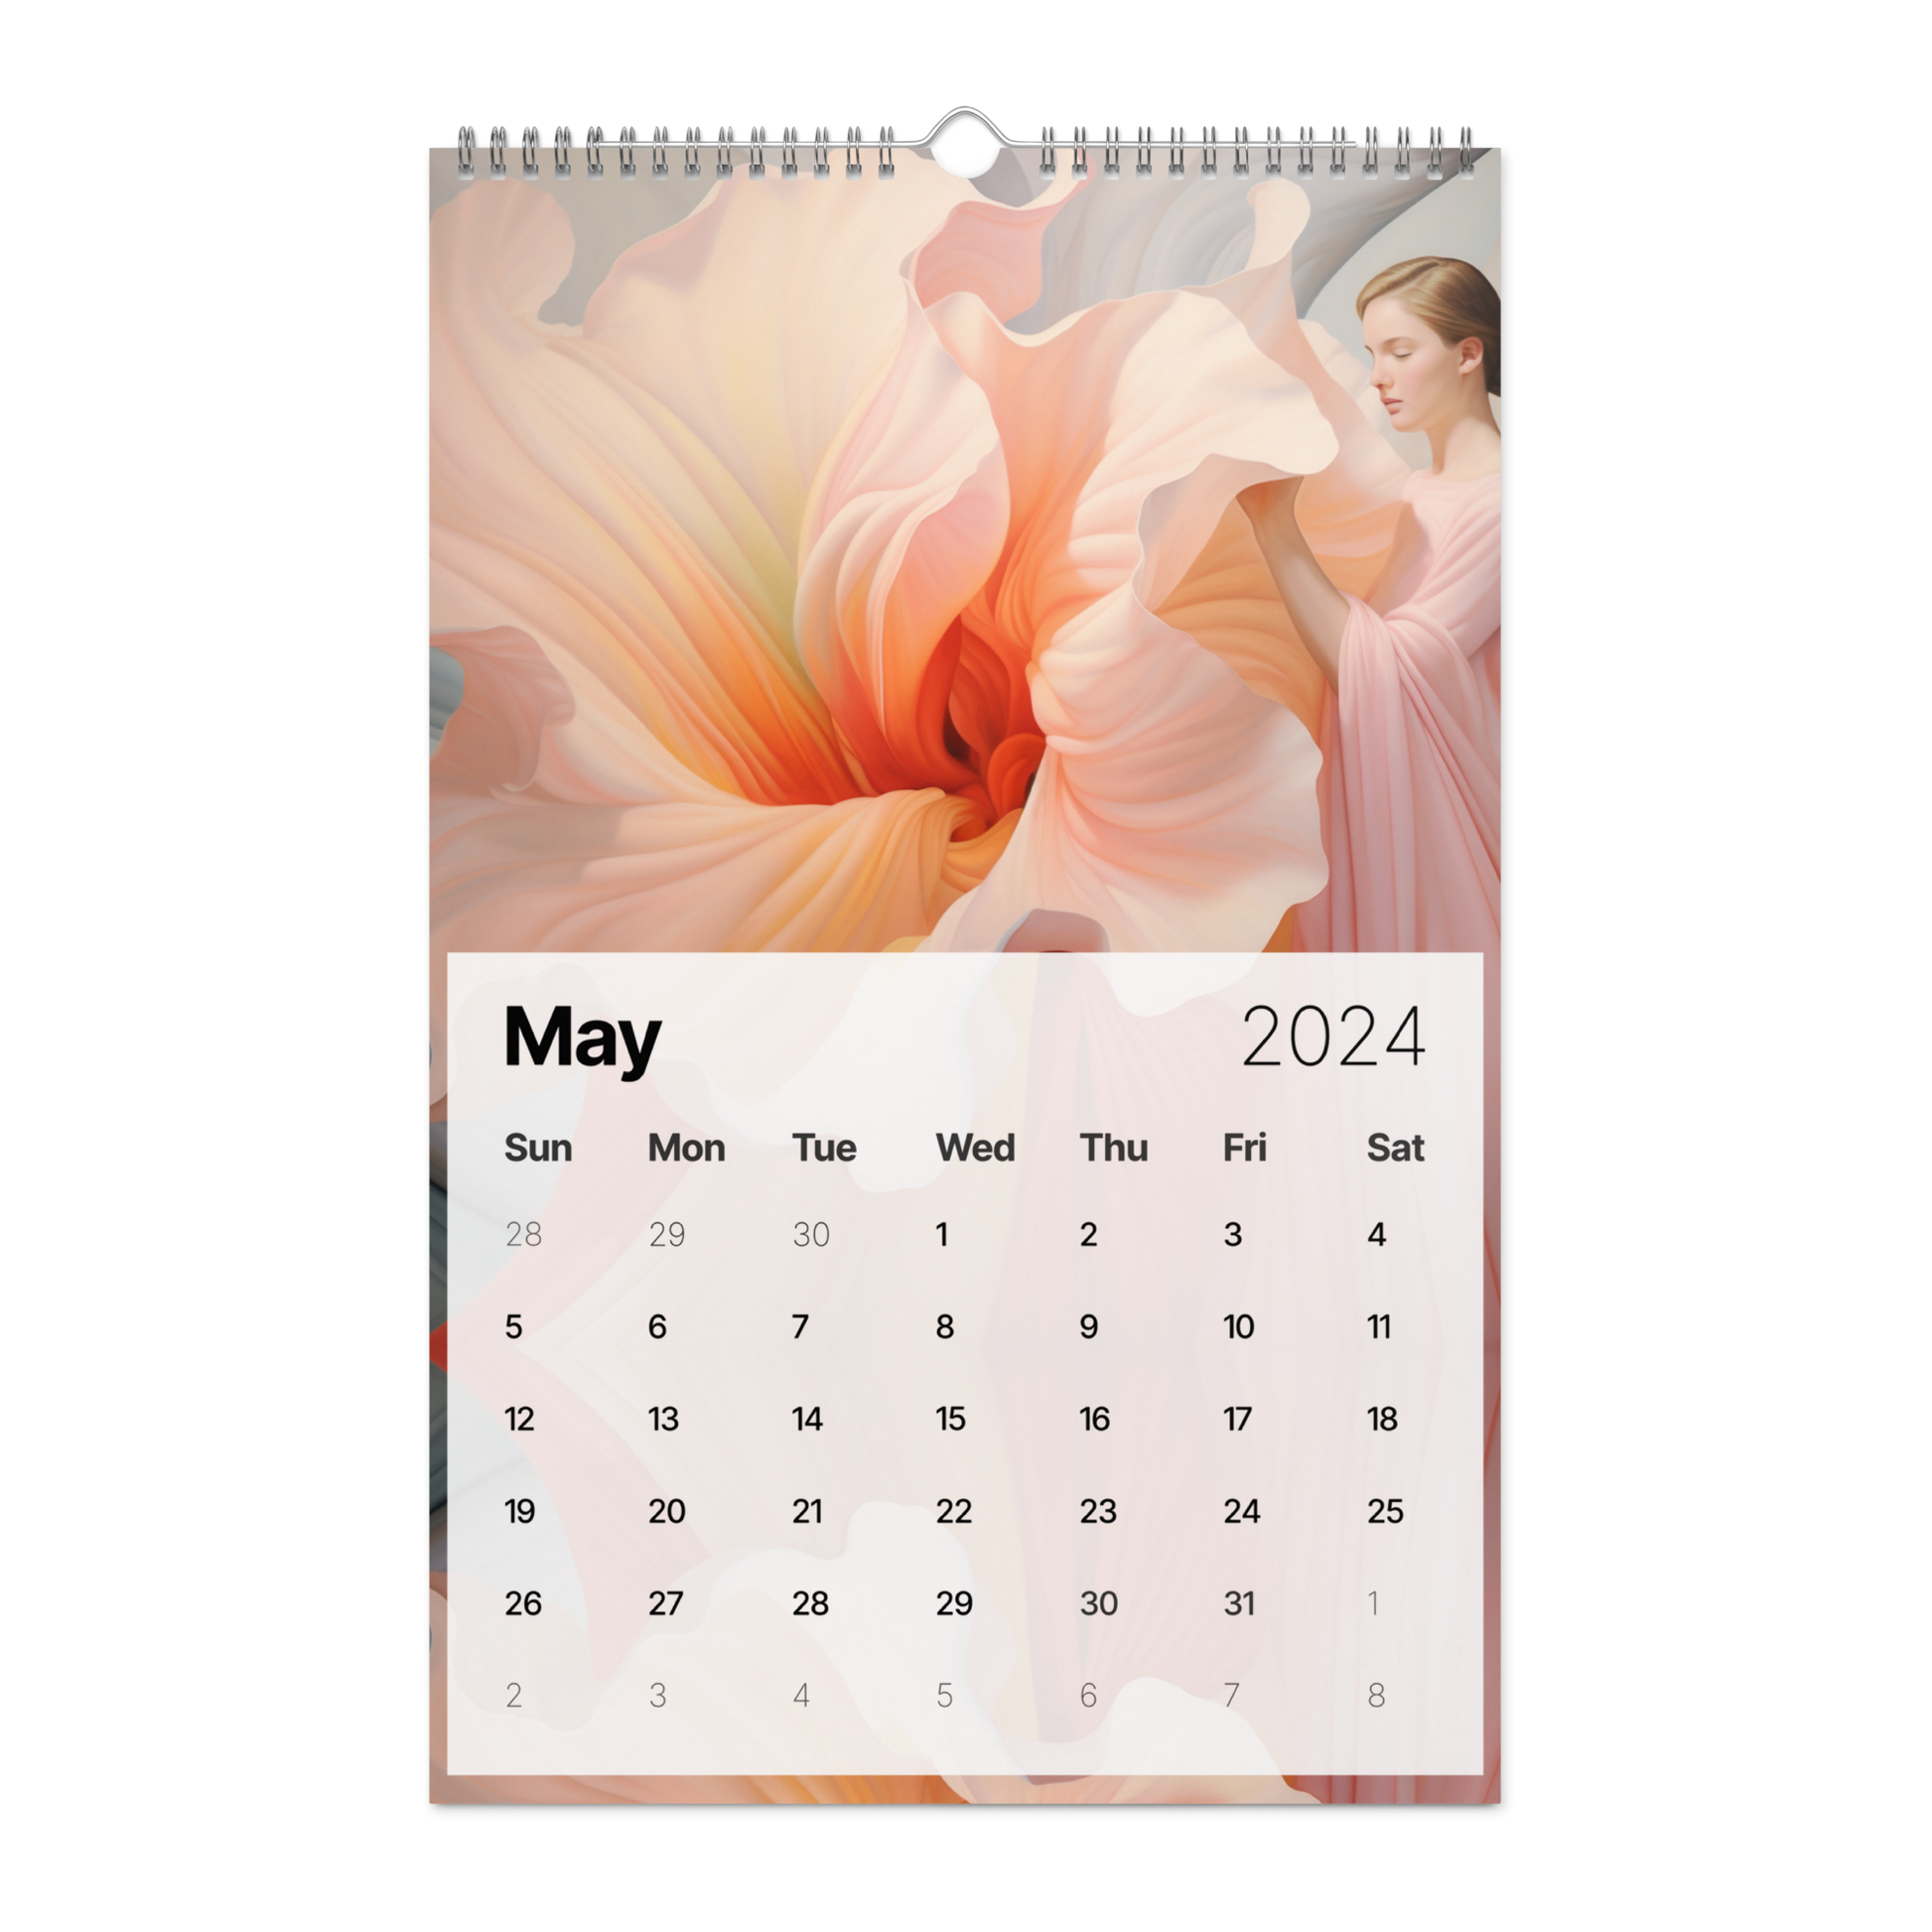 This Flowers Are Magic - Wall calendar (2024) showcases a captivating image of a woman gracefully holding a vibrant flower, making it an exquisite decorative piece.